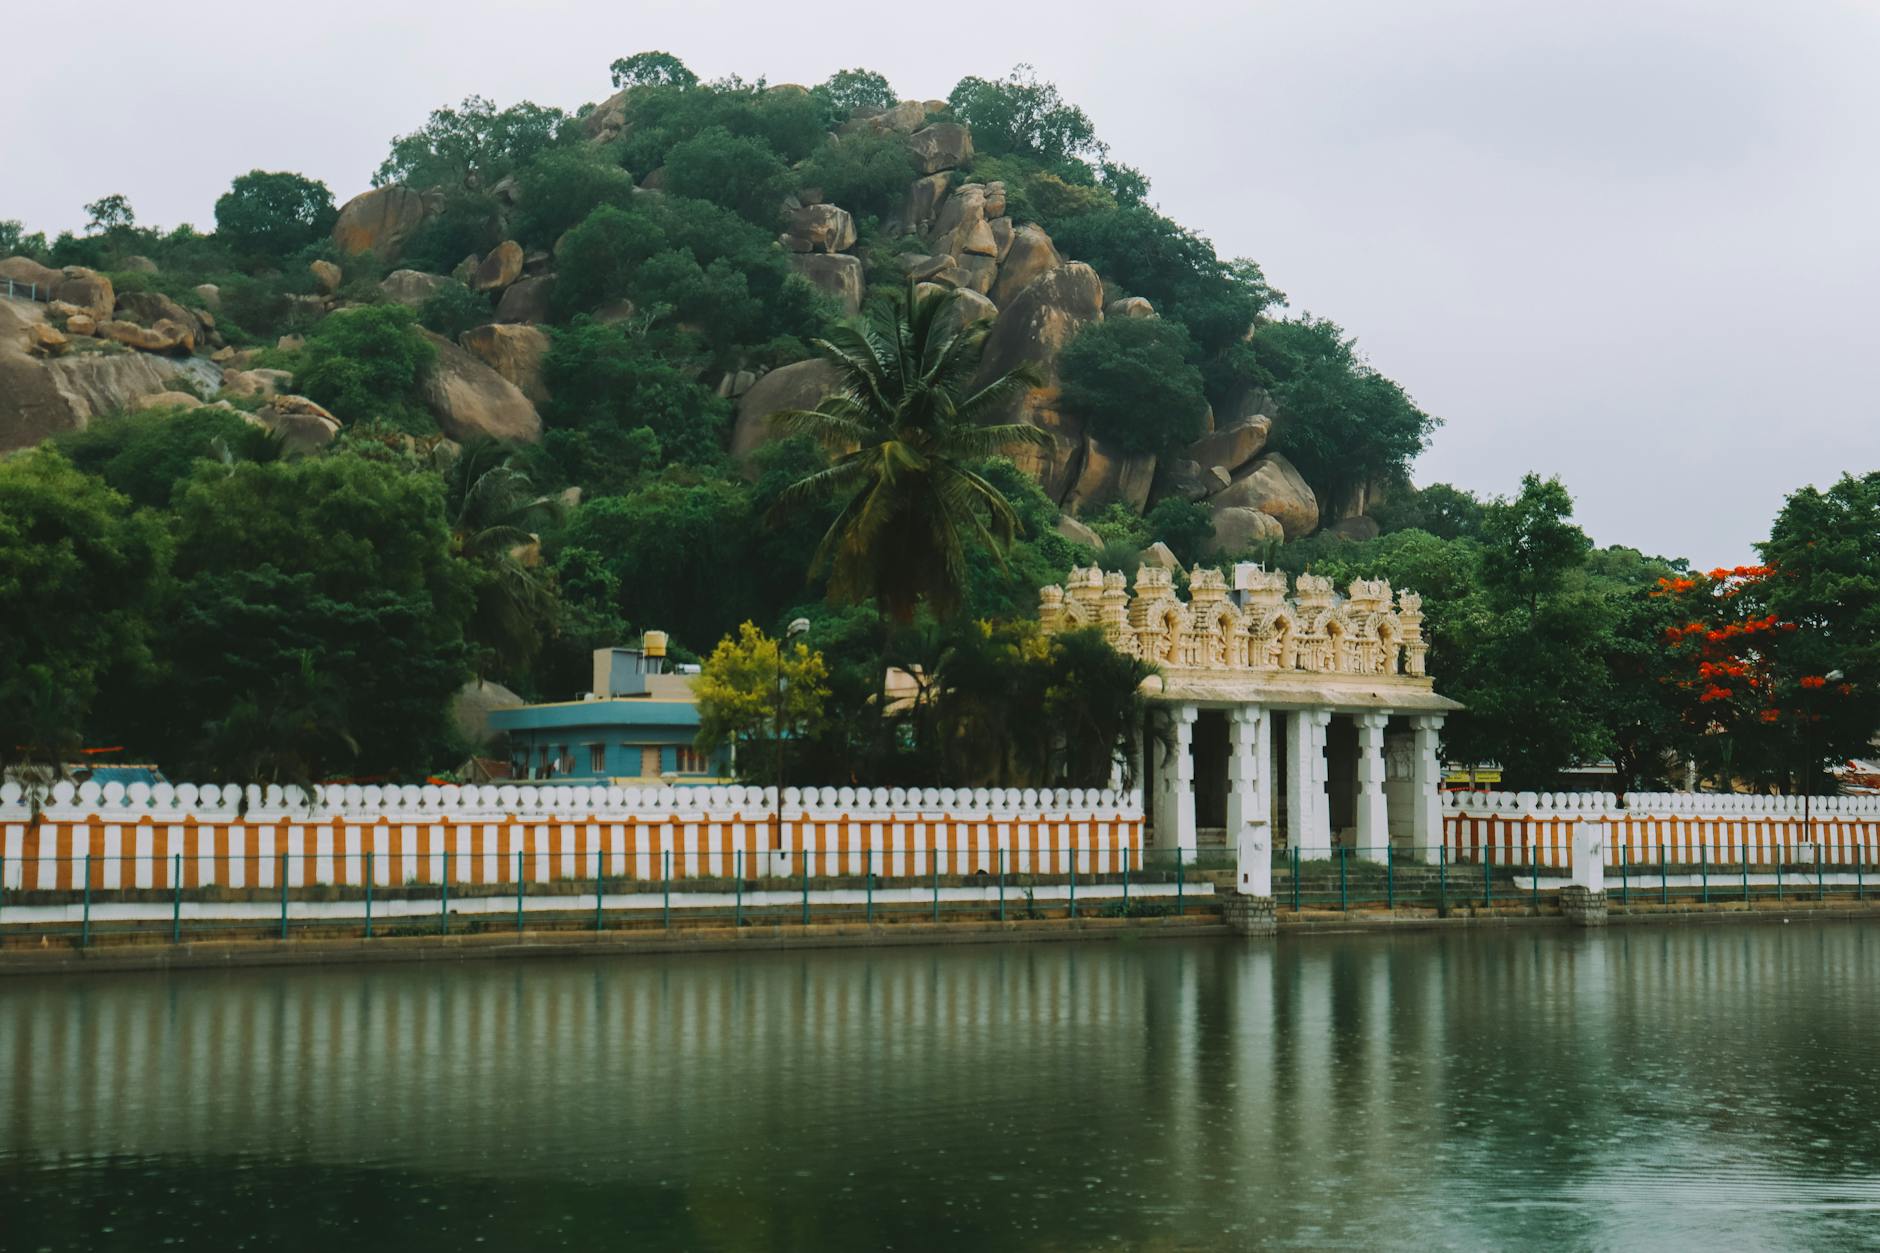 Gate by the Pond in the Town of Shravanabelagola